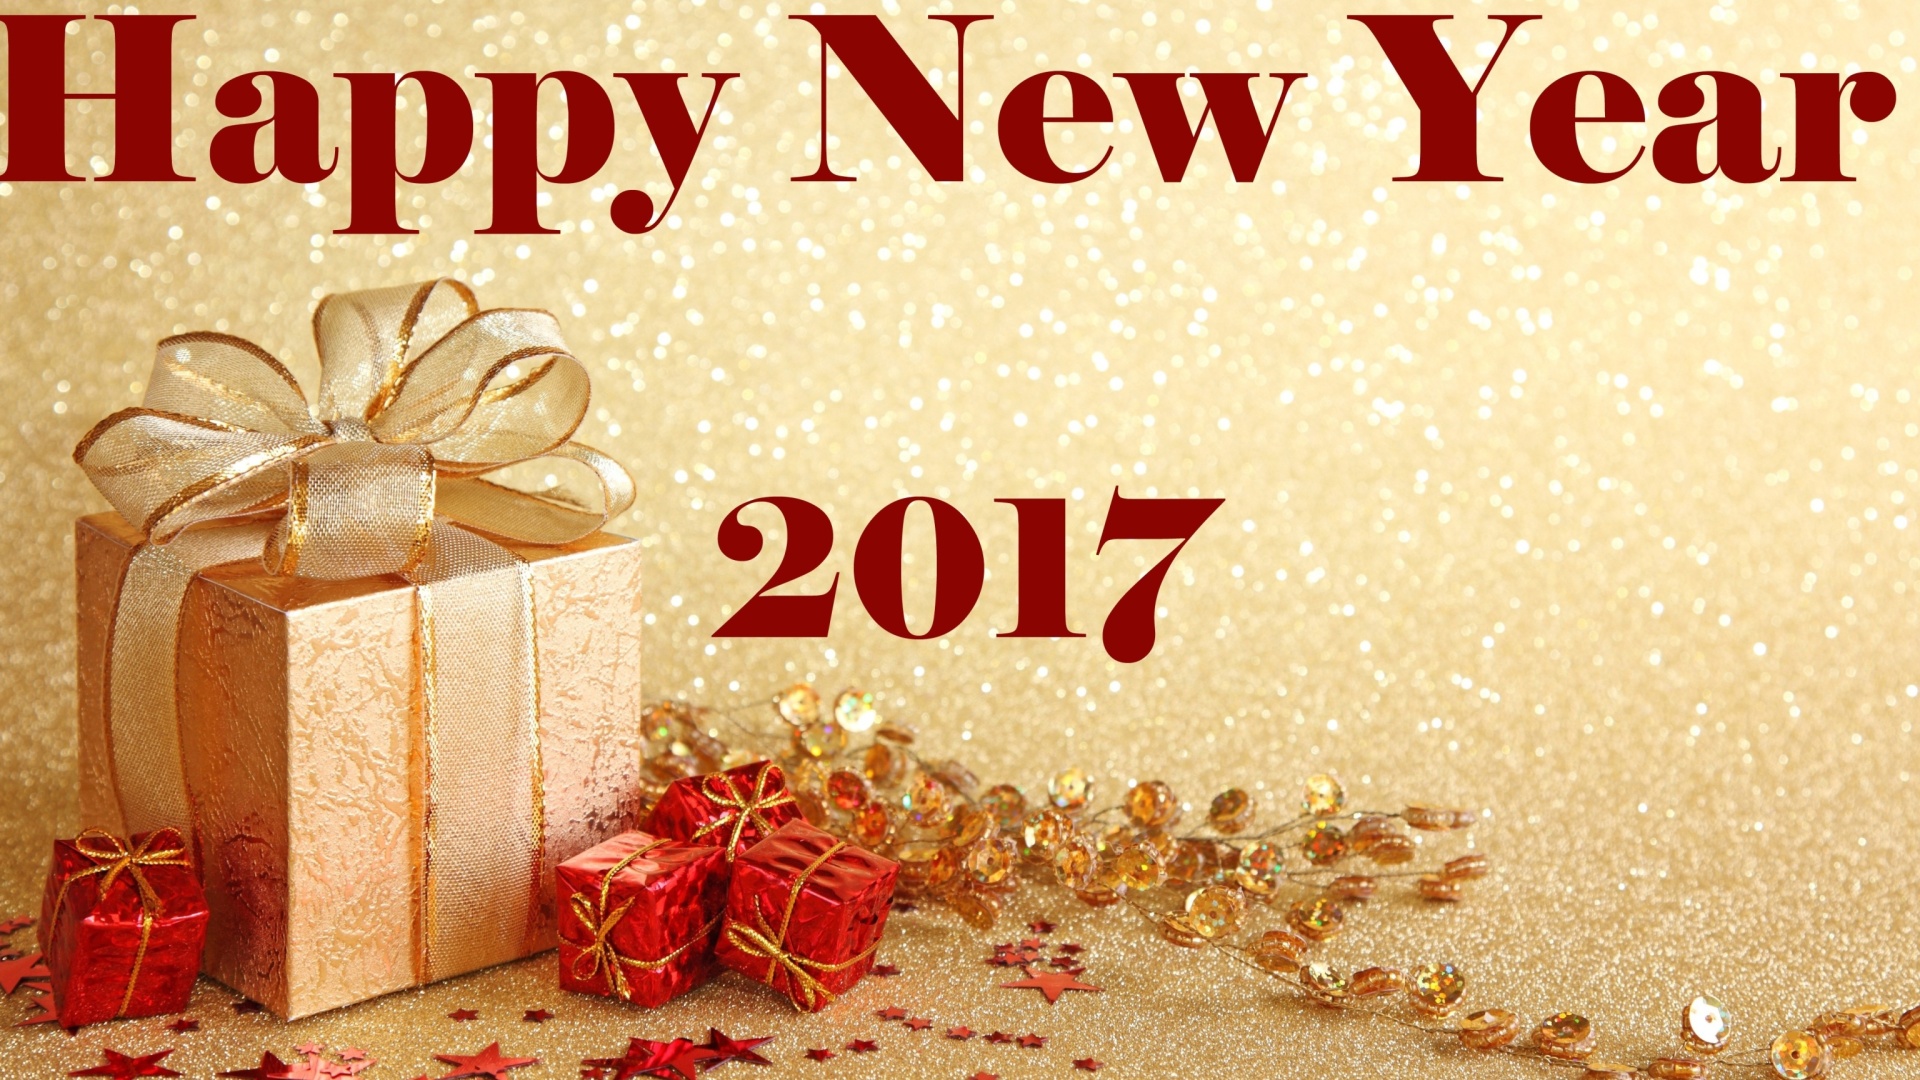 Happy New Year 2017 with Gifts wallpaper 1920x1080